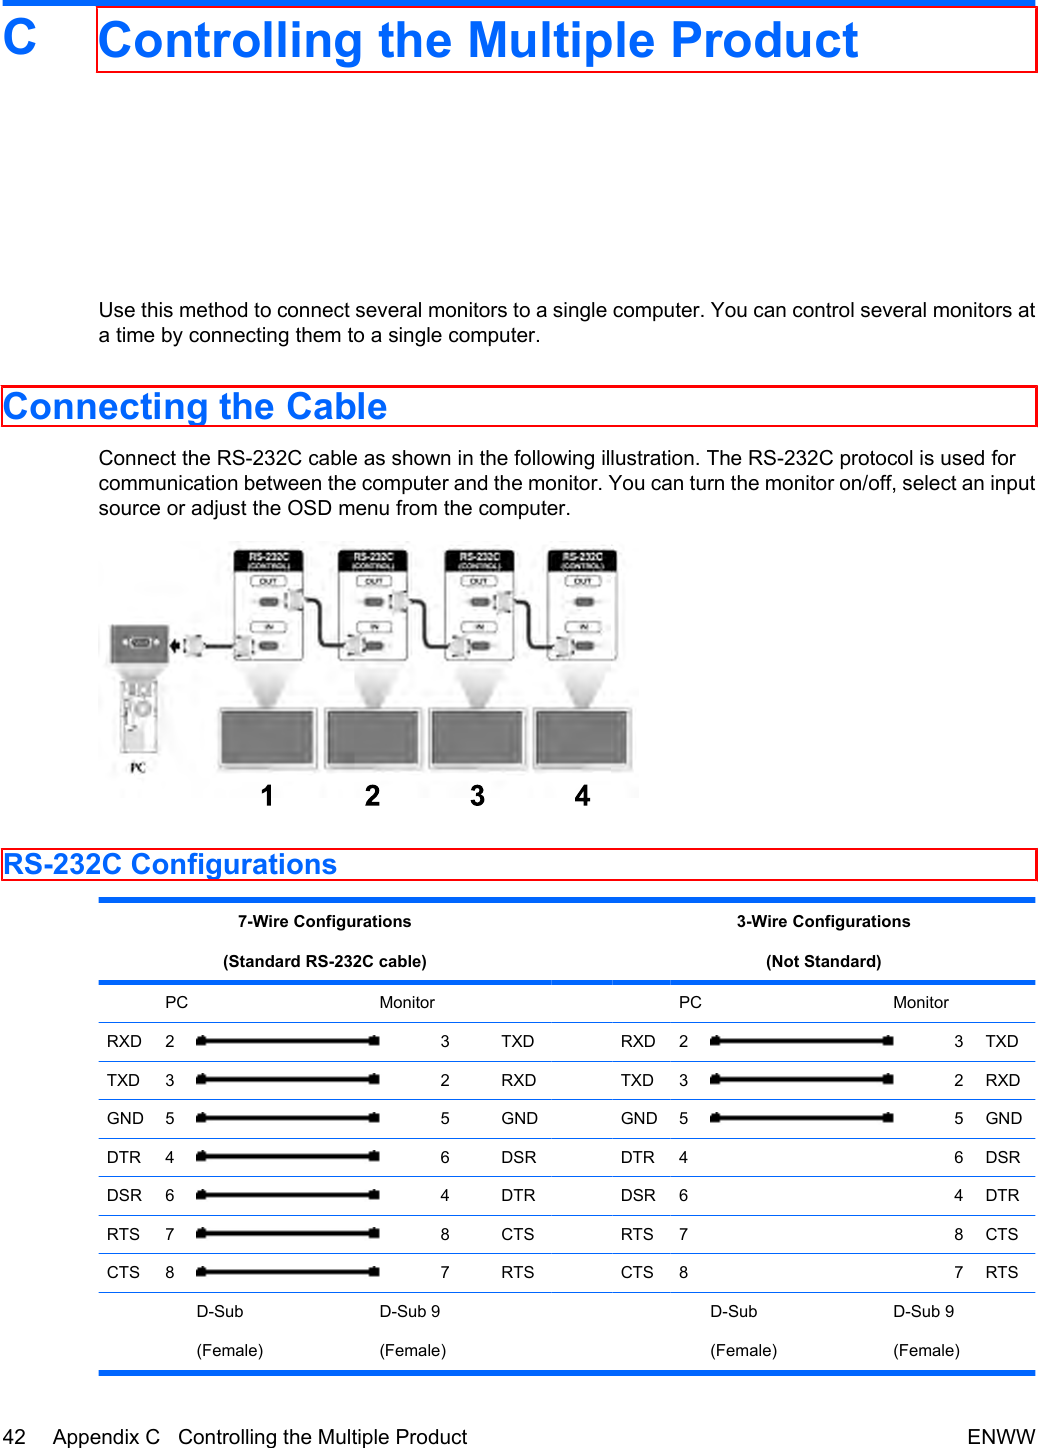 CControlling the Multiple ProductUse this method to connect several monitors to a single computer. You can control several monitors ata time by connecting them to a single computer.Connecting the CableConnect the RS-232C cable as shown in the following illustration. The RS-232C protocol is used forcommunication between the computer and the monitor. You can turn the monitor on/off, select an inputsource or adjust the OSD menu from the computer.RS-232C Configurations7-Wire Configurations(Standard RS-232C cable) 3-Wire Configurations(Not Standard) PC   Monitor     PC   Monitor  RXD 2 3 TXD  RXD 2 3 TXDTXD 3 2 RXD  TXD 3 2 RXDGND 5 5 GND  GND 5 5 GNDDTR 4 6 DSR  DTR 4         6 DSRDSR 6 4 DTR  DSR 6         4 DTRRTS 7 8 CTS  RTS 7         8 CTSCTS 8 7 RTS  CTS 8         7 RTS  D-Sub(Female) D-Sub 9(Female)     D-Sub(Female) D-Sub 9(Female) 42 Appendix C   Controlling the Multiple Product ENWW